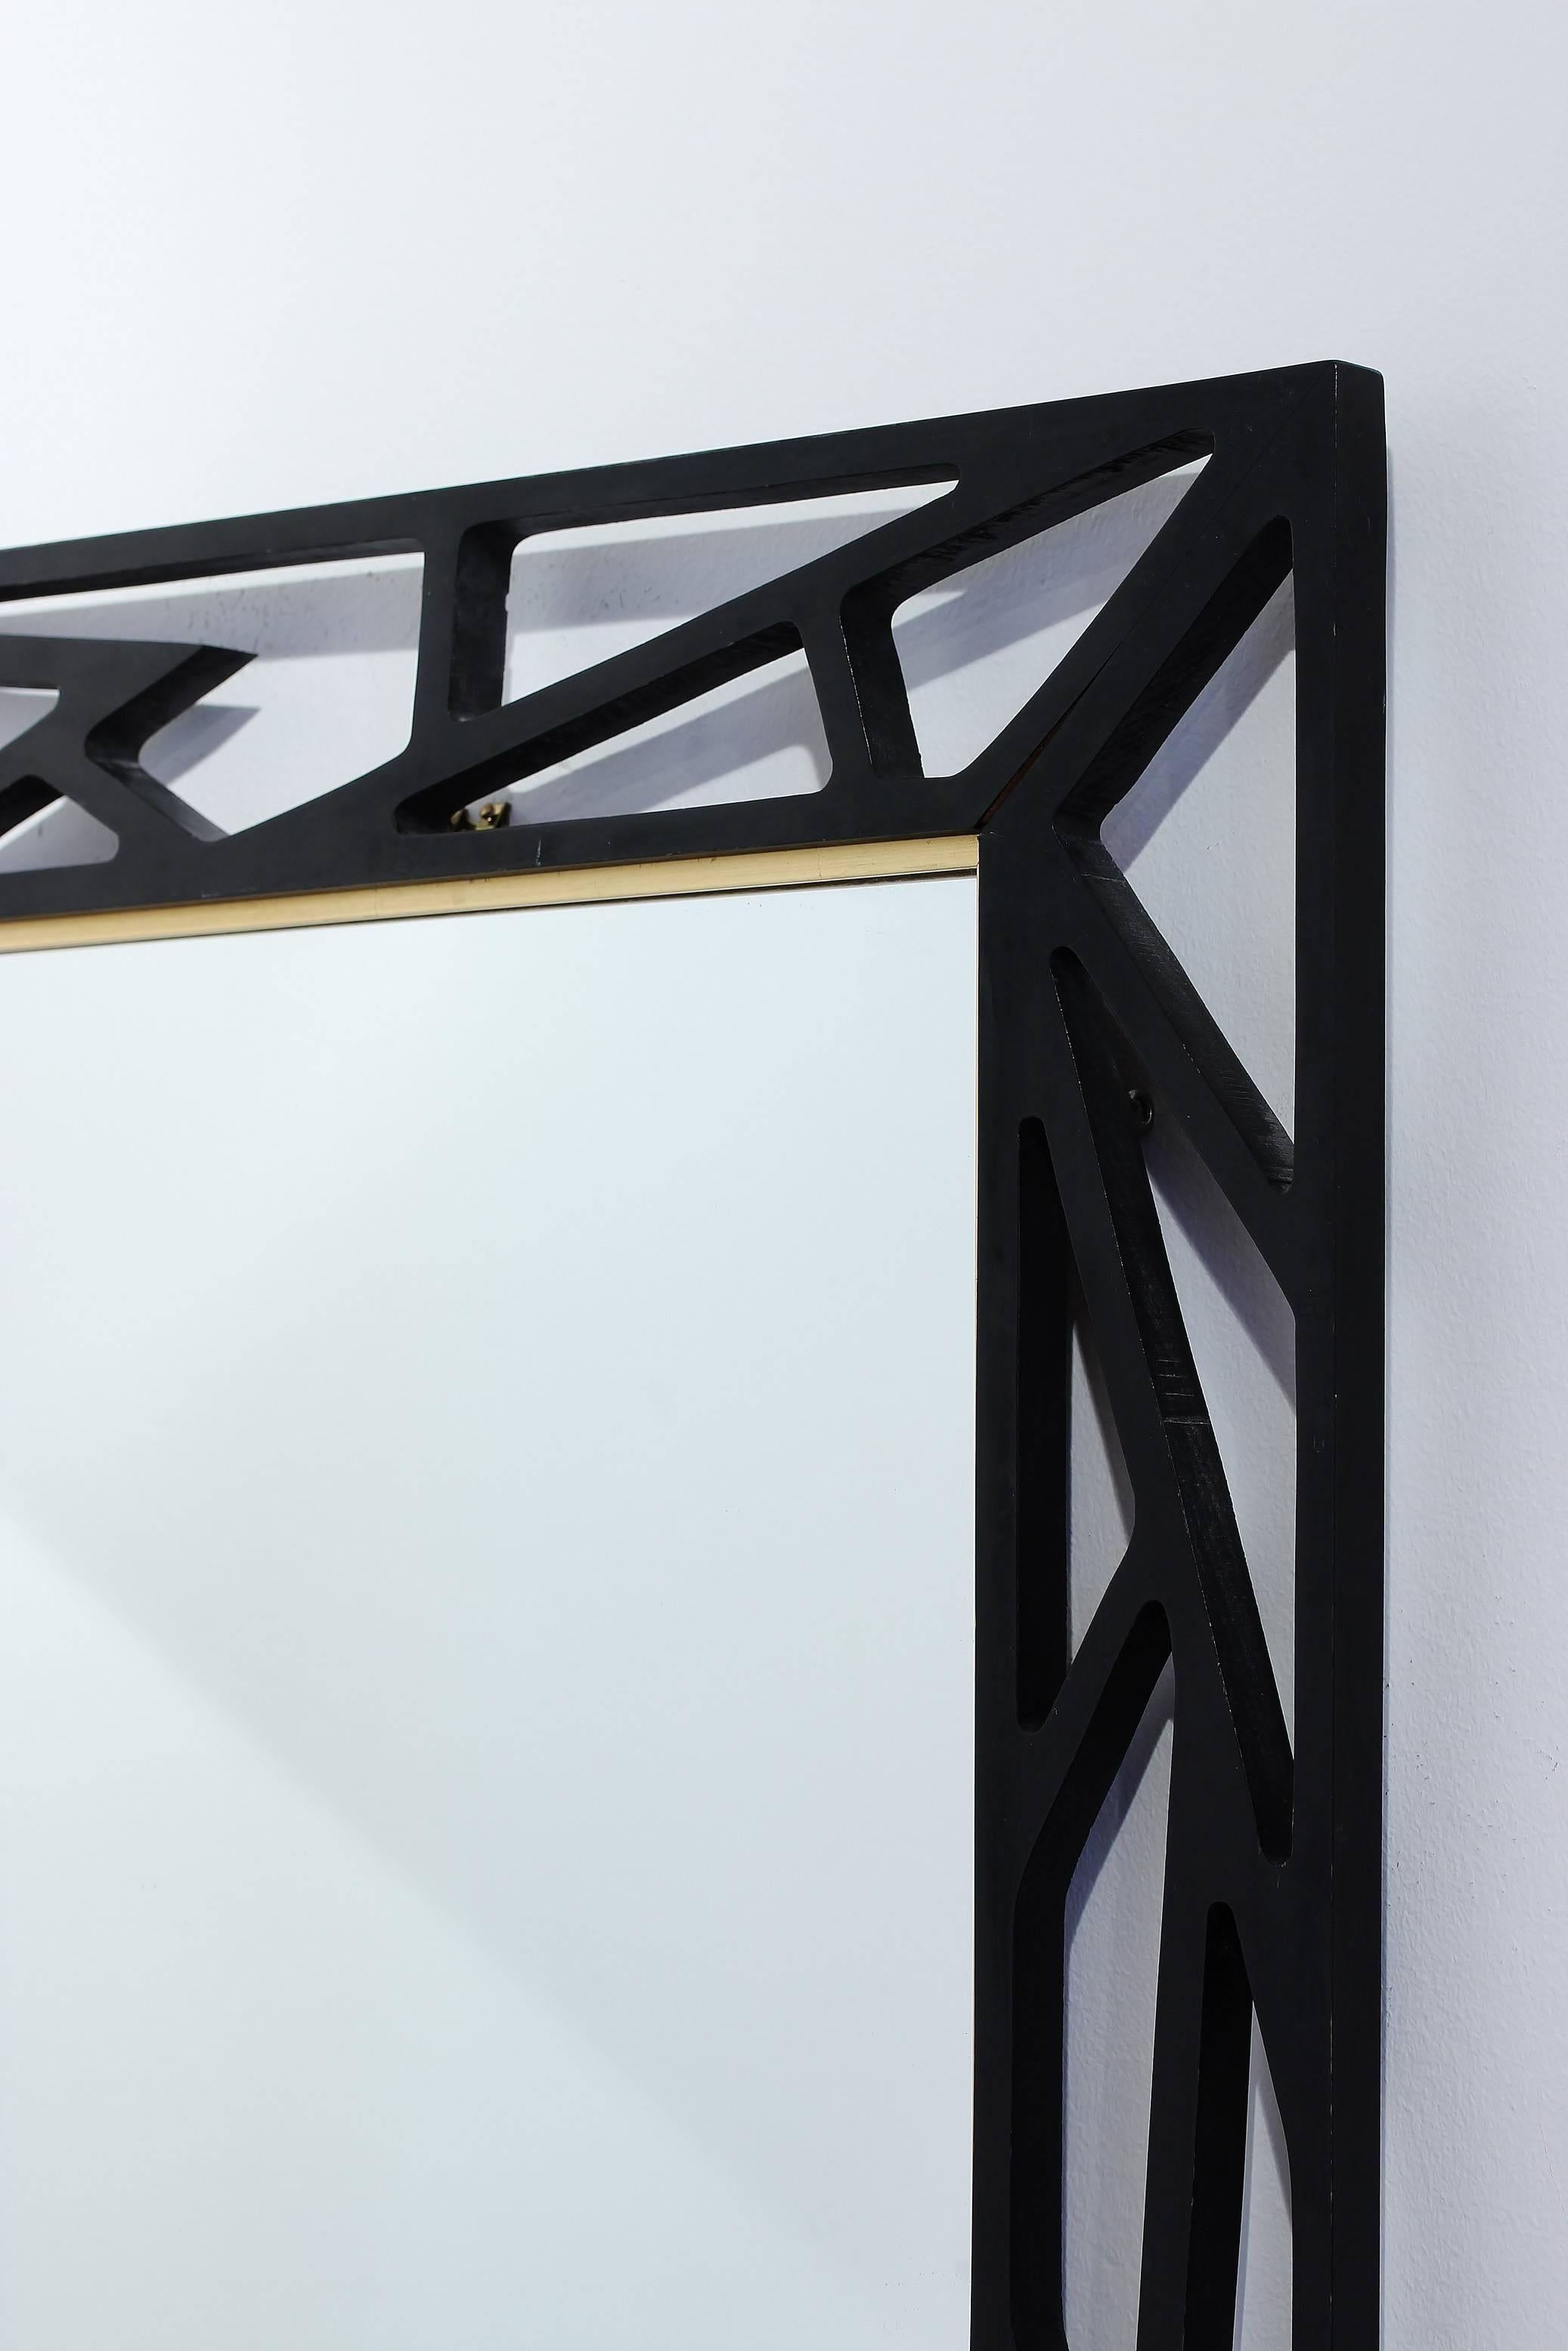 Rare mirror, model no. 135, produced by Eden Spegel. Handmade geometrical wooden frame. Black lacquer with golden frame edging. Great original condition with very few signs of wear.